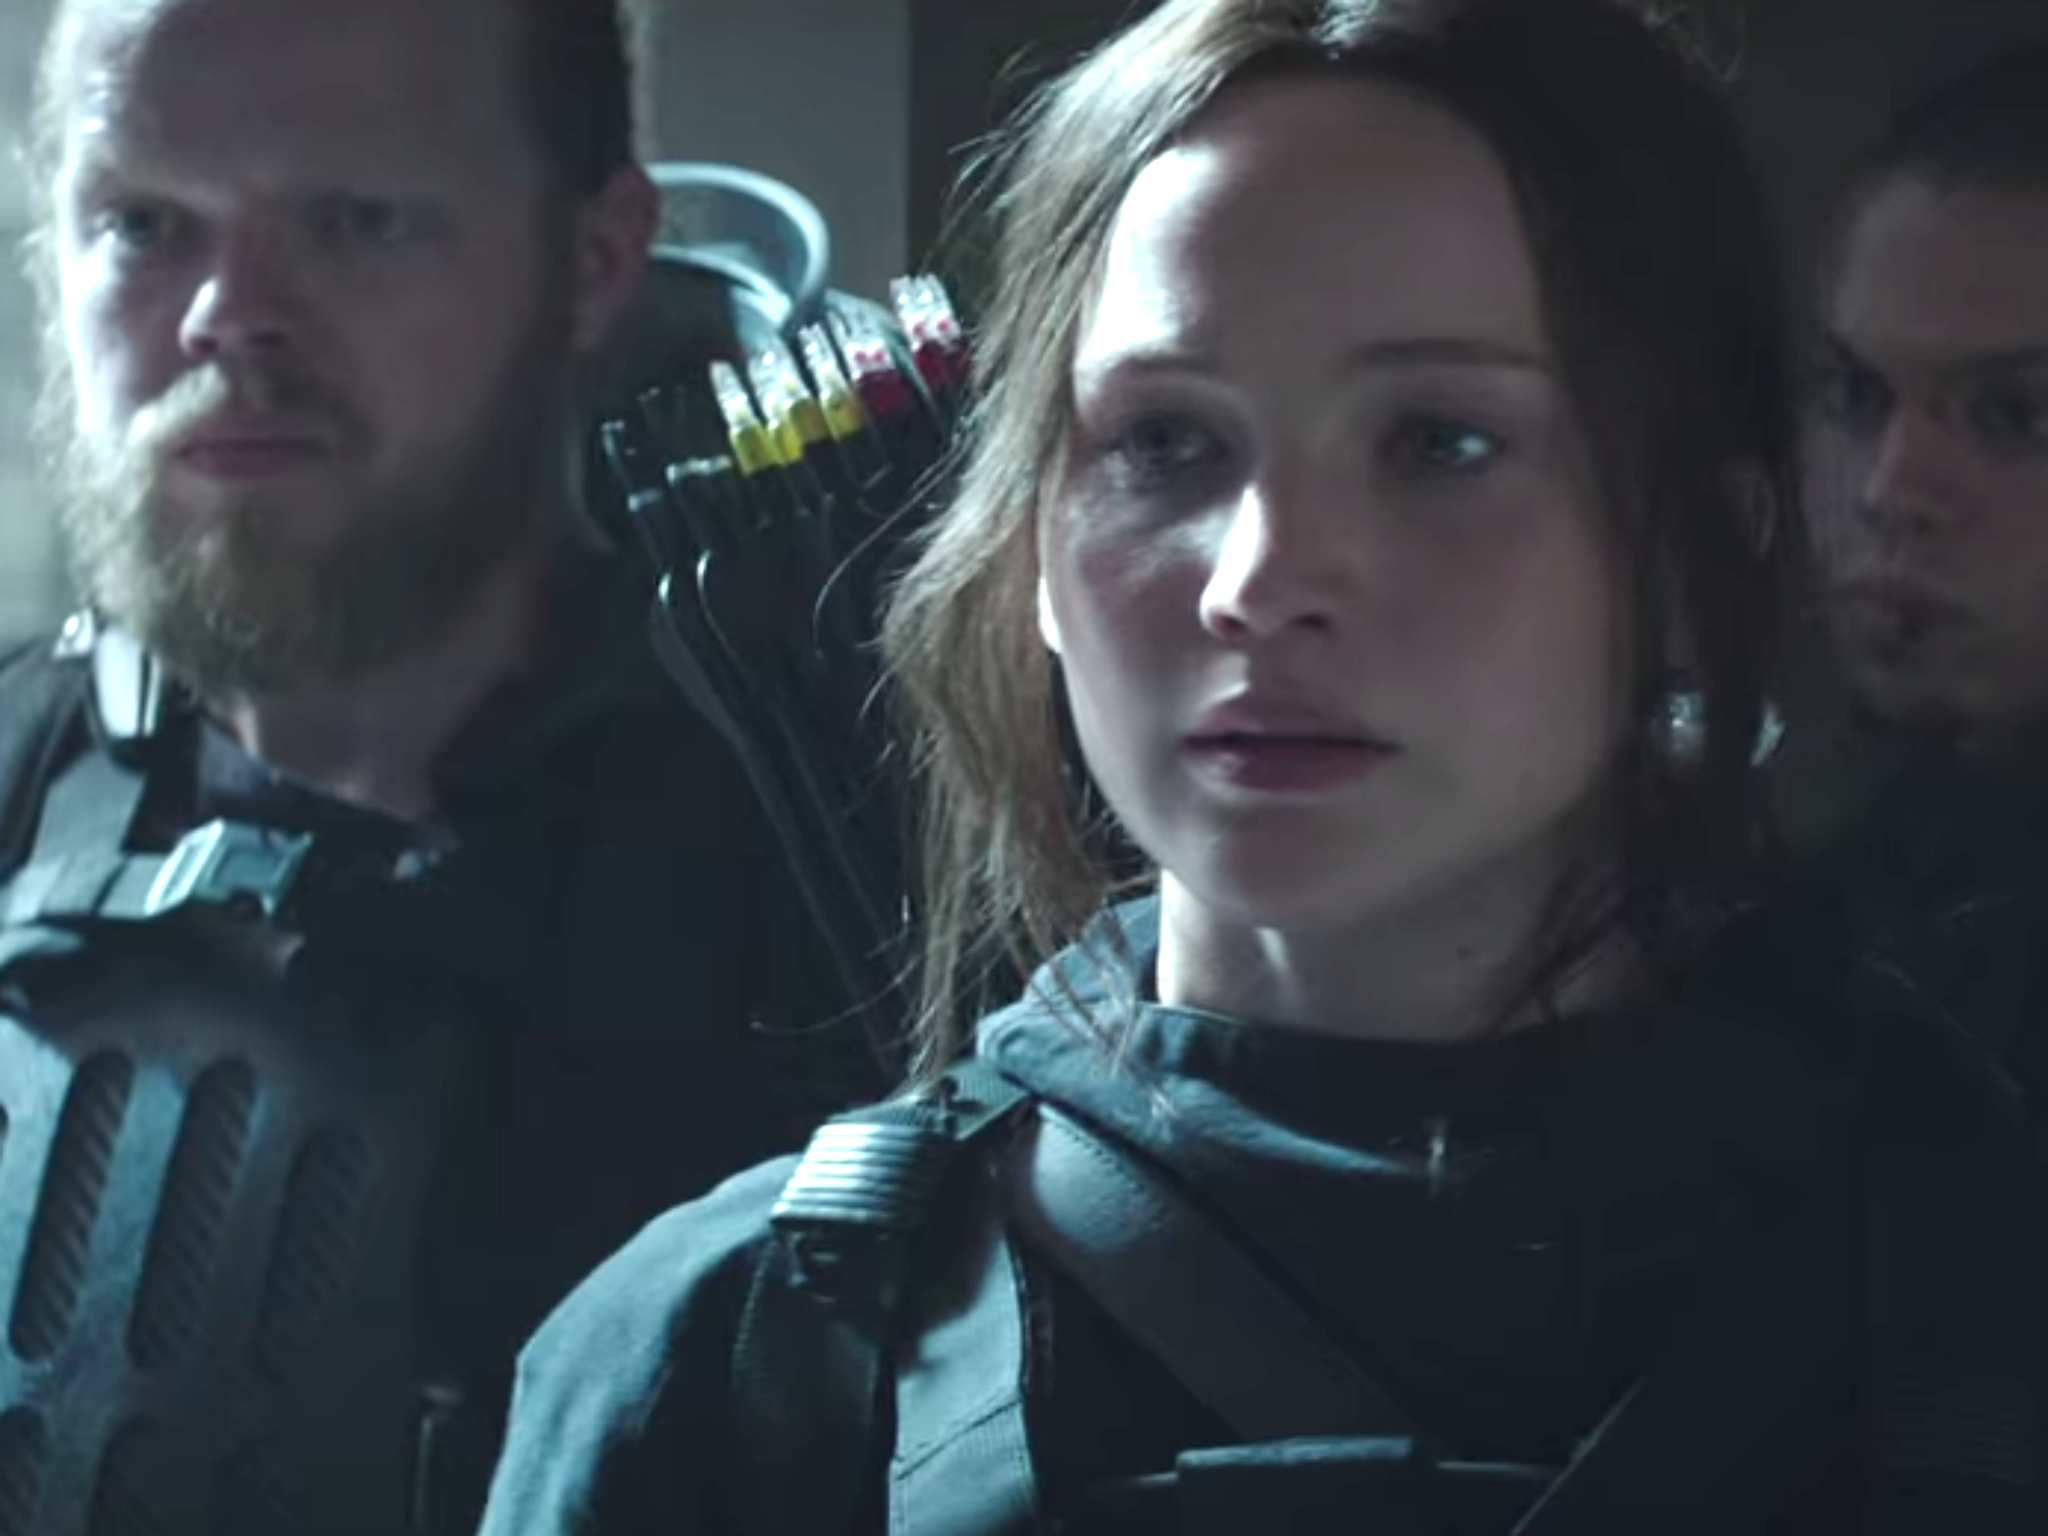 Katniss Everdeen faces her toughest challenge yet as her enemy is hell-bent on destroying her